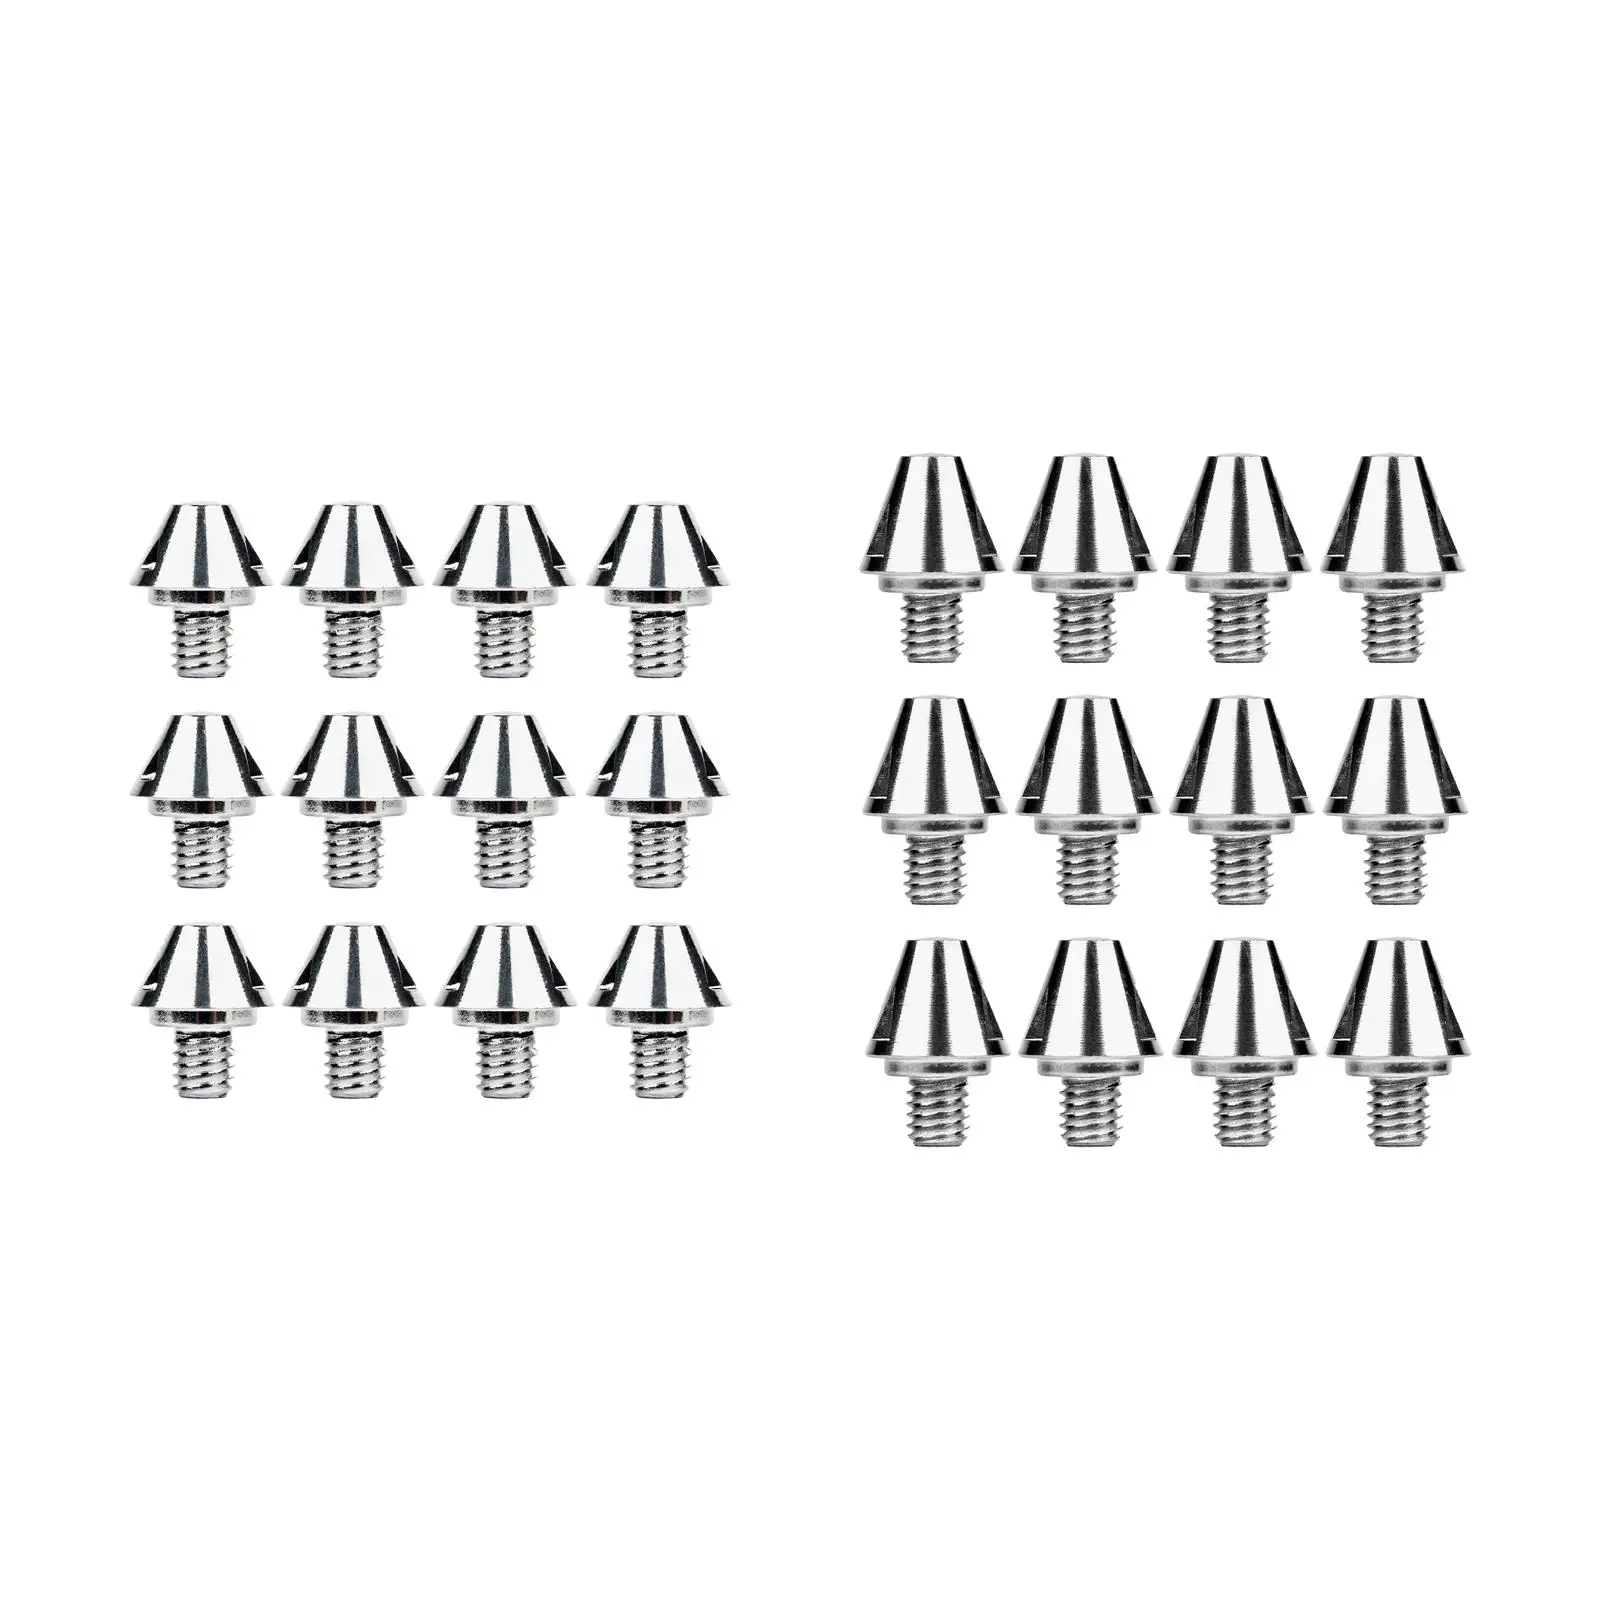 12x Soccer Shoe Spikes Comfortable Screw in Strength Aluminum Football Boot Studs for Indoor Outdoor Sports Competition Training